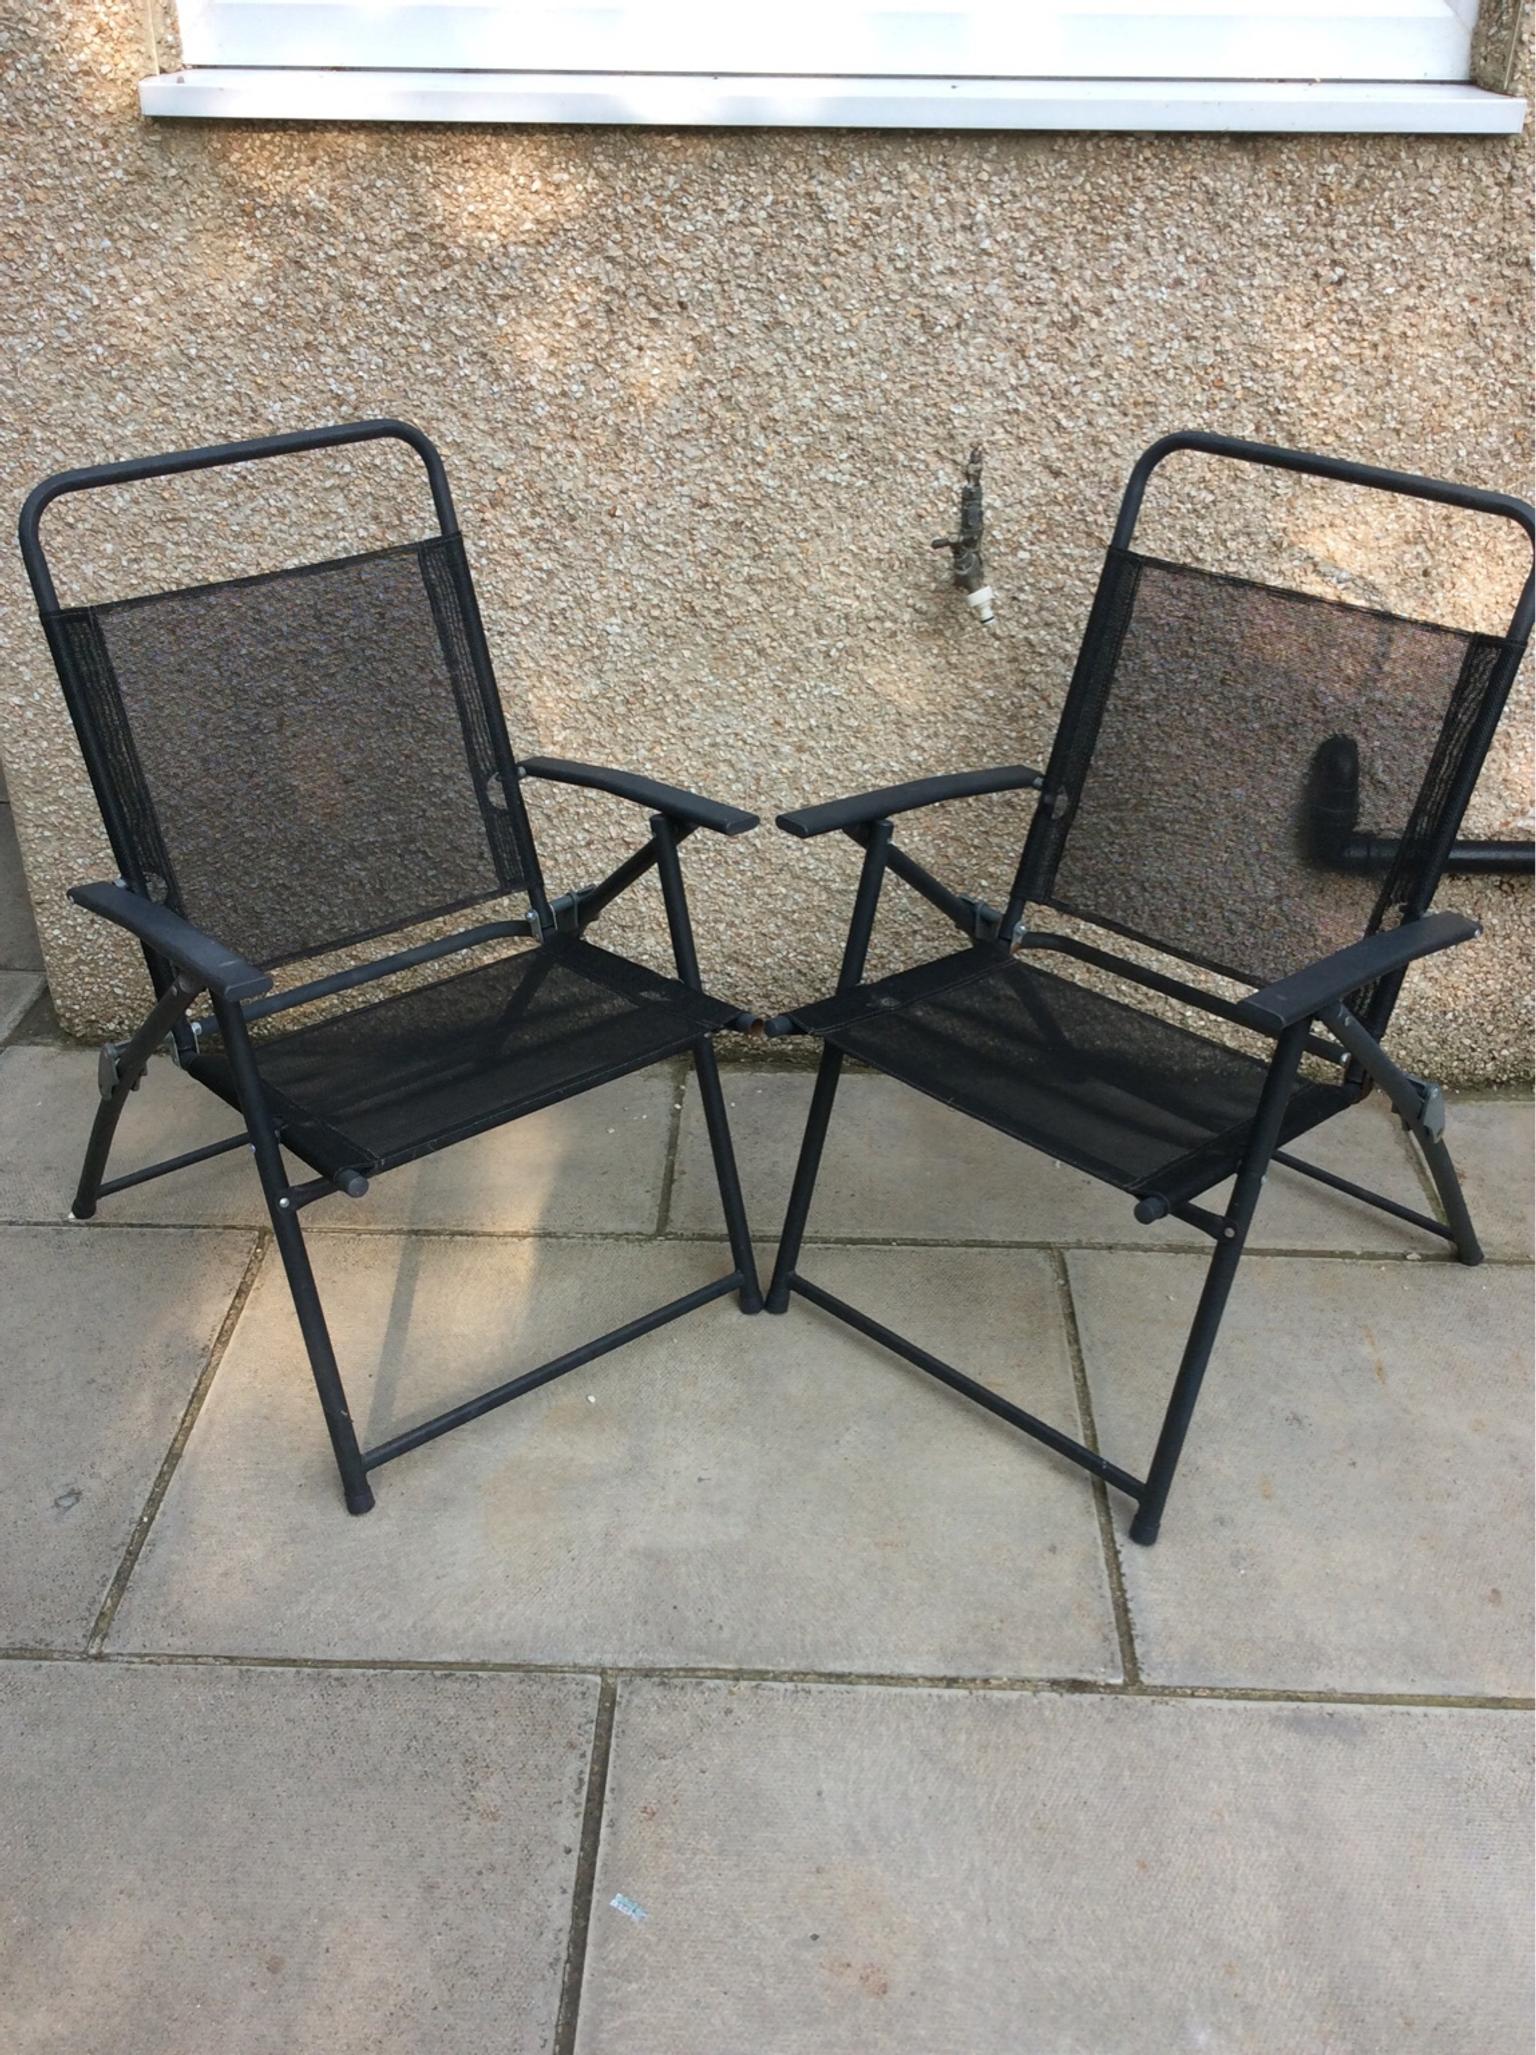 2 Black garden chairs ( fold up) in 